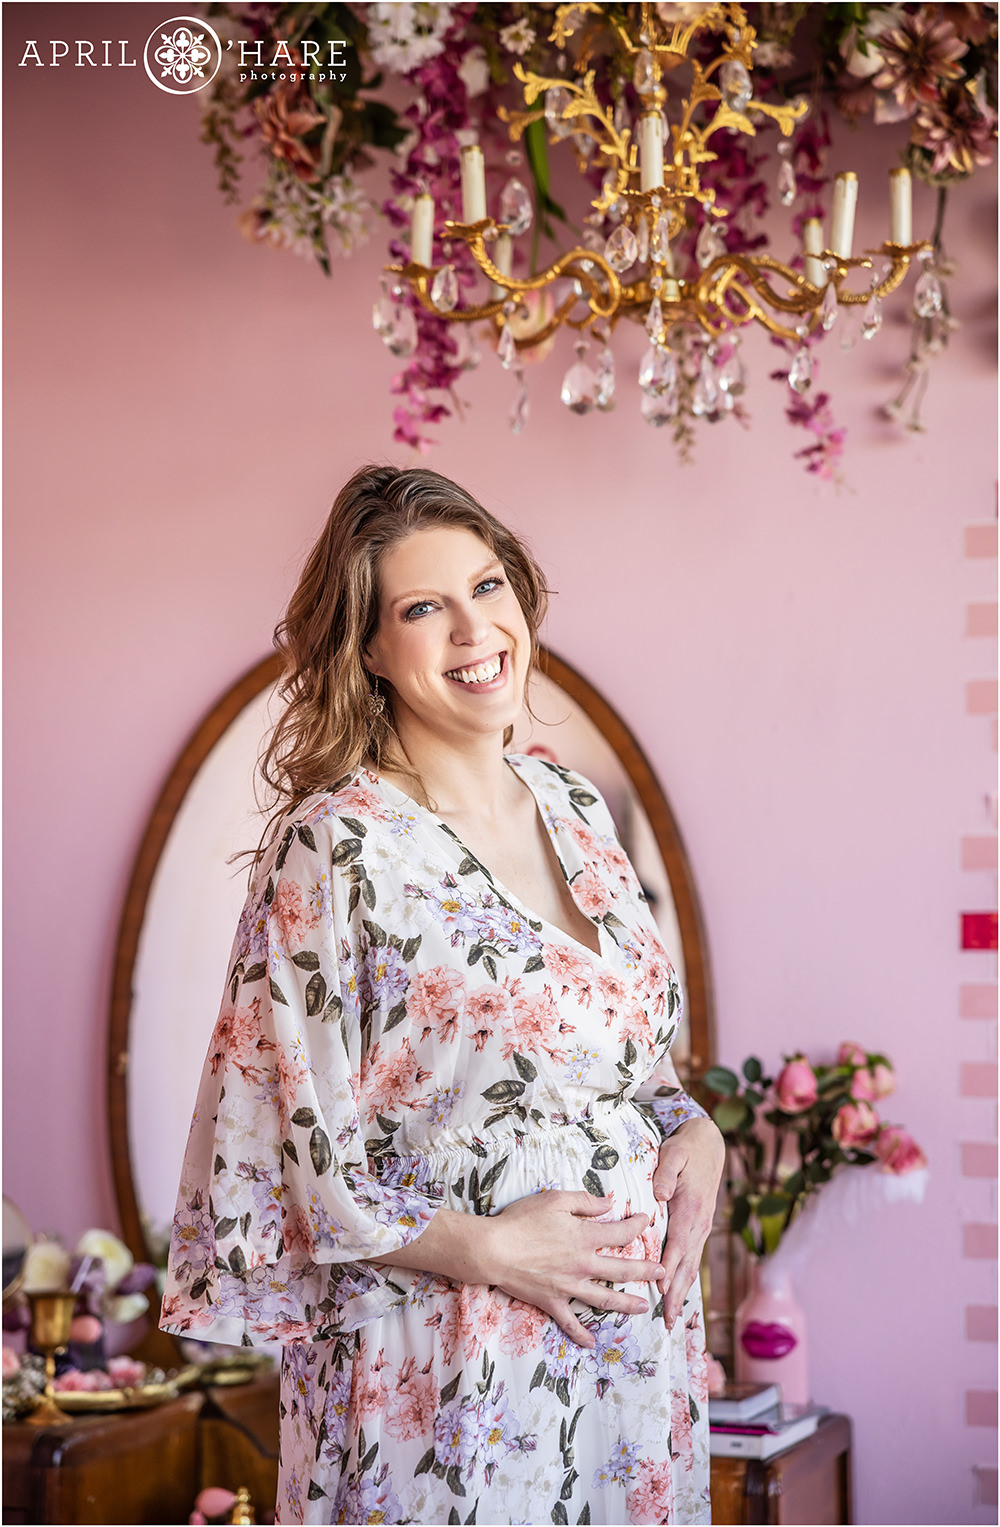 Gorgeous floral maternity portrait for a pregnant mama to be in a pretty pink Valentine's Day themed styled set in a Denver photography studio